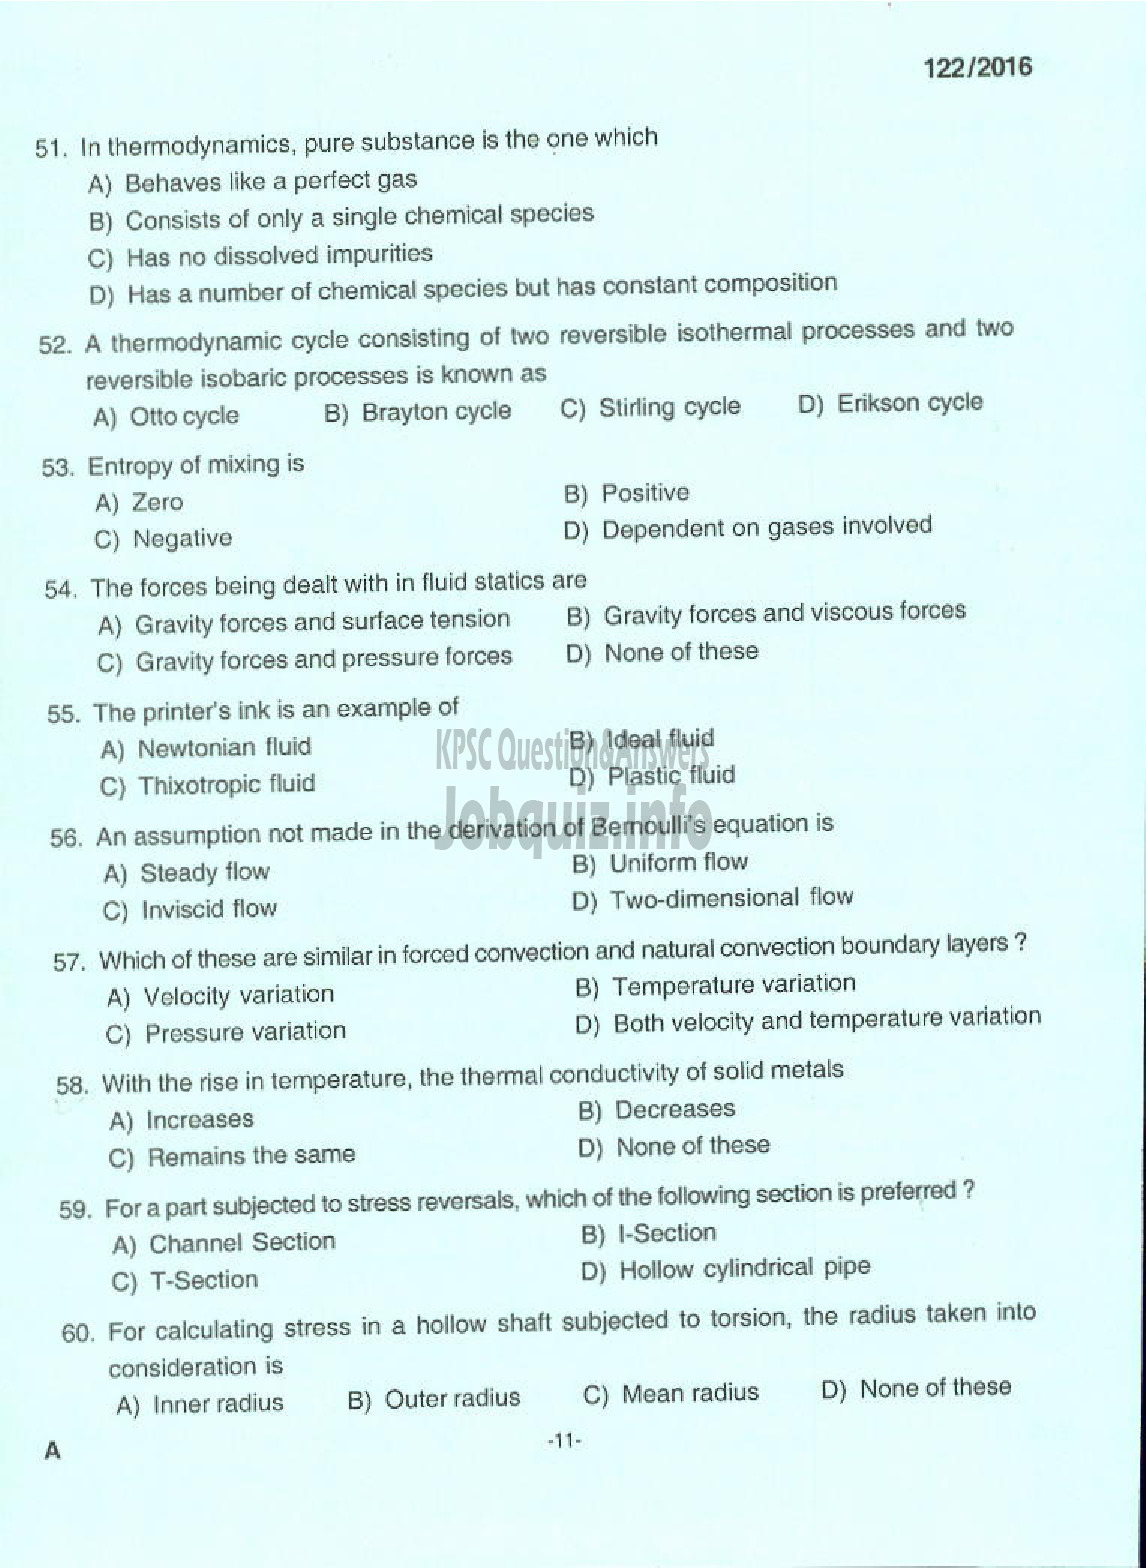 Kerala PSC Question Paper - ASSISTANT PROFESSOR MECHANICAL ENGINEERING TECHNICAL EDUCATION ENGINEERING DCOLLEGES-9